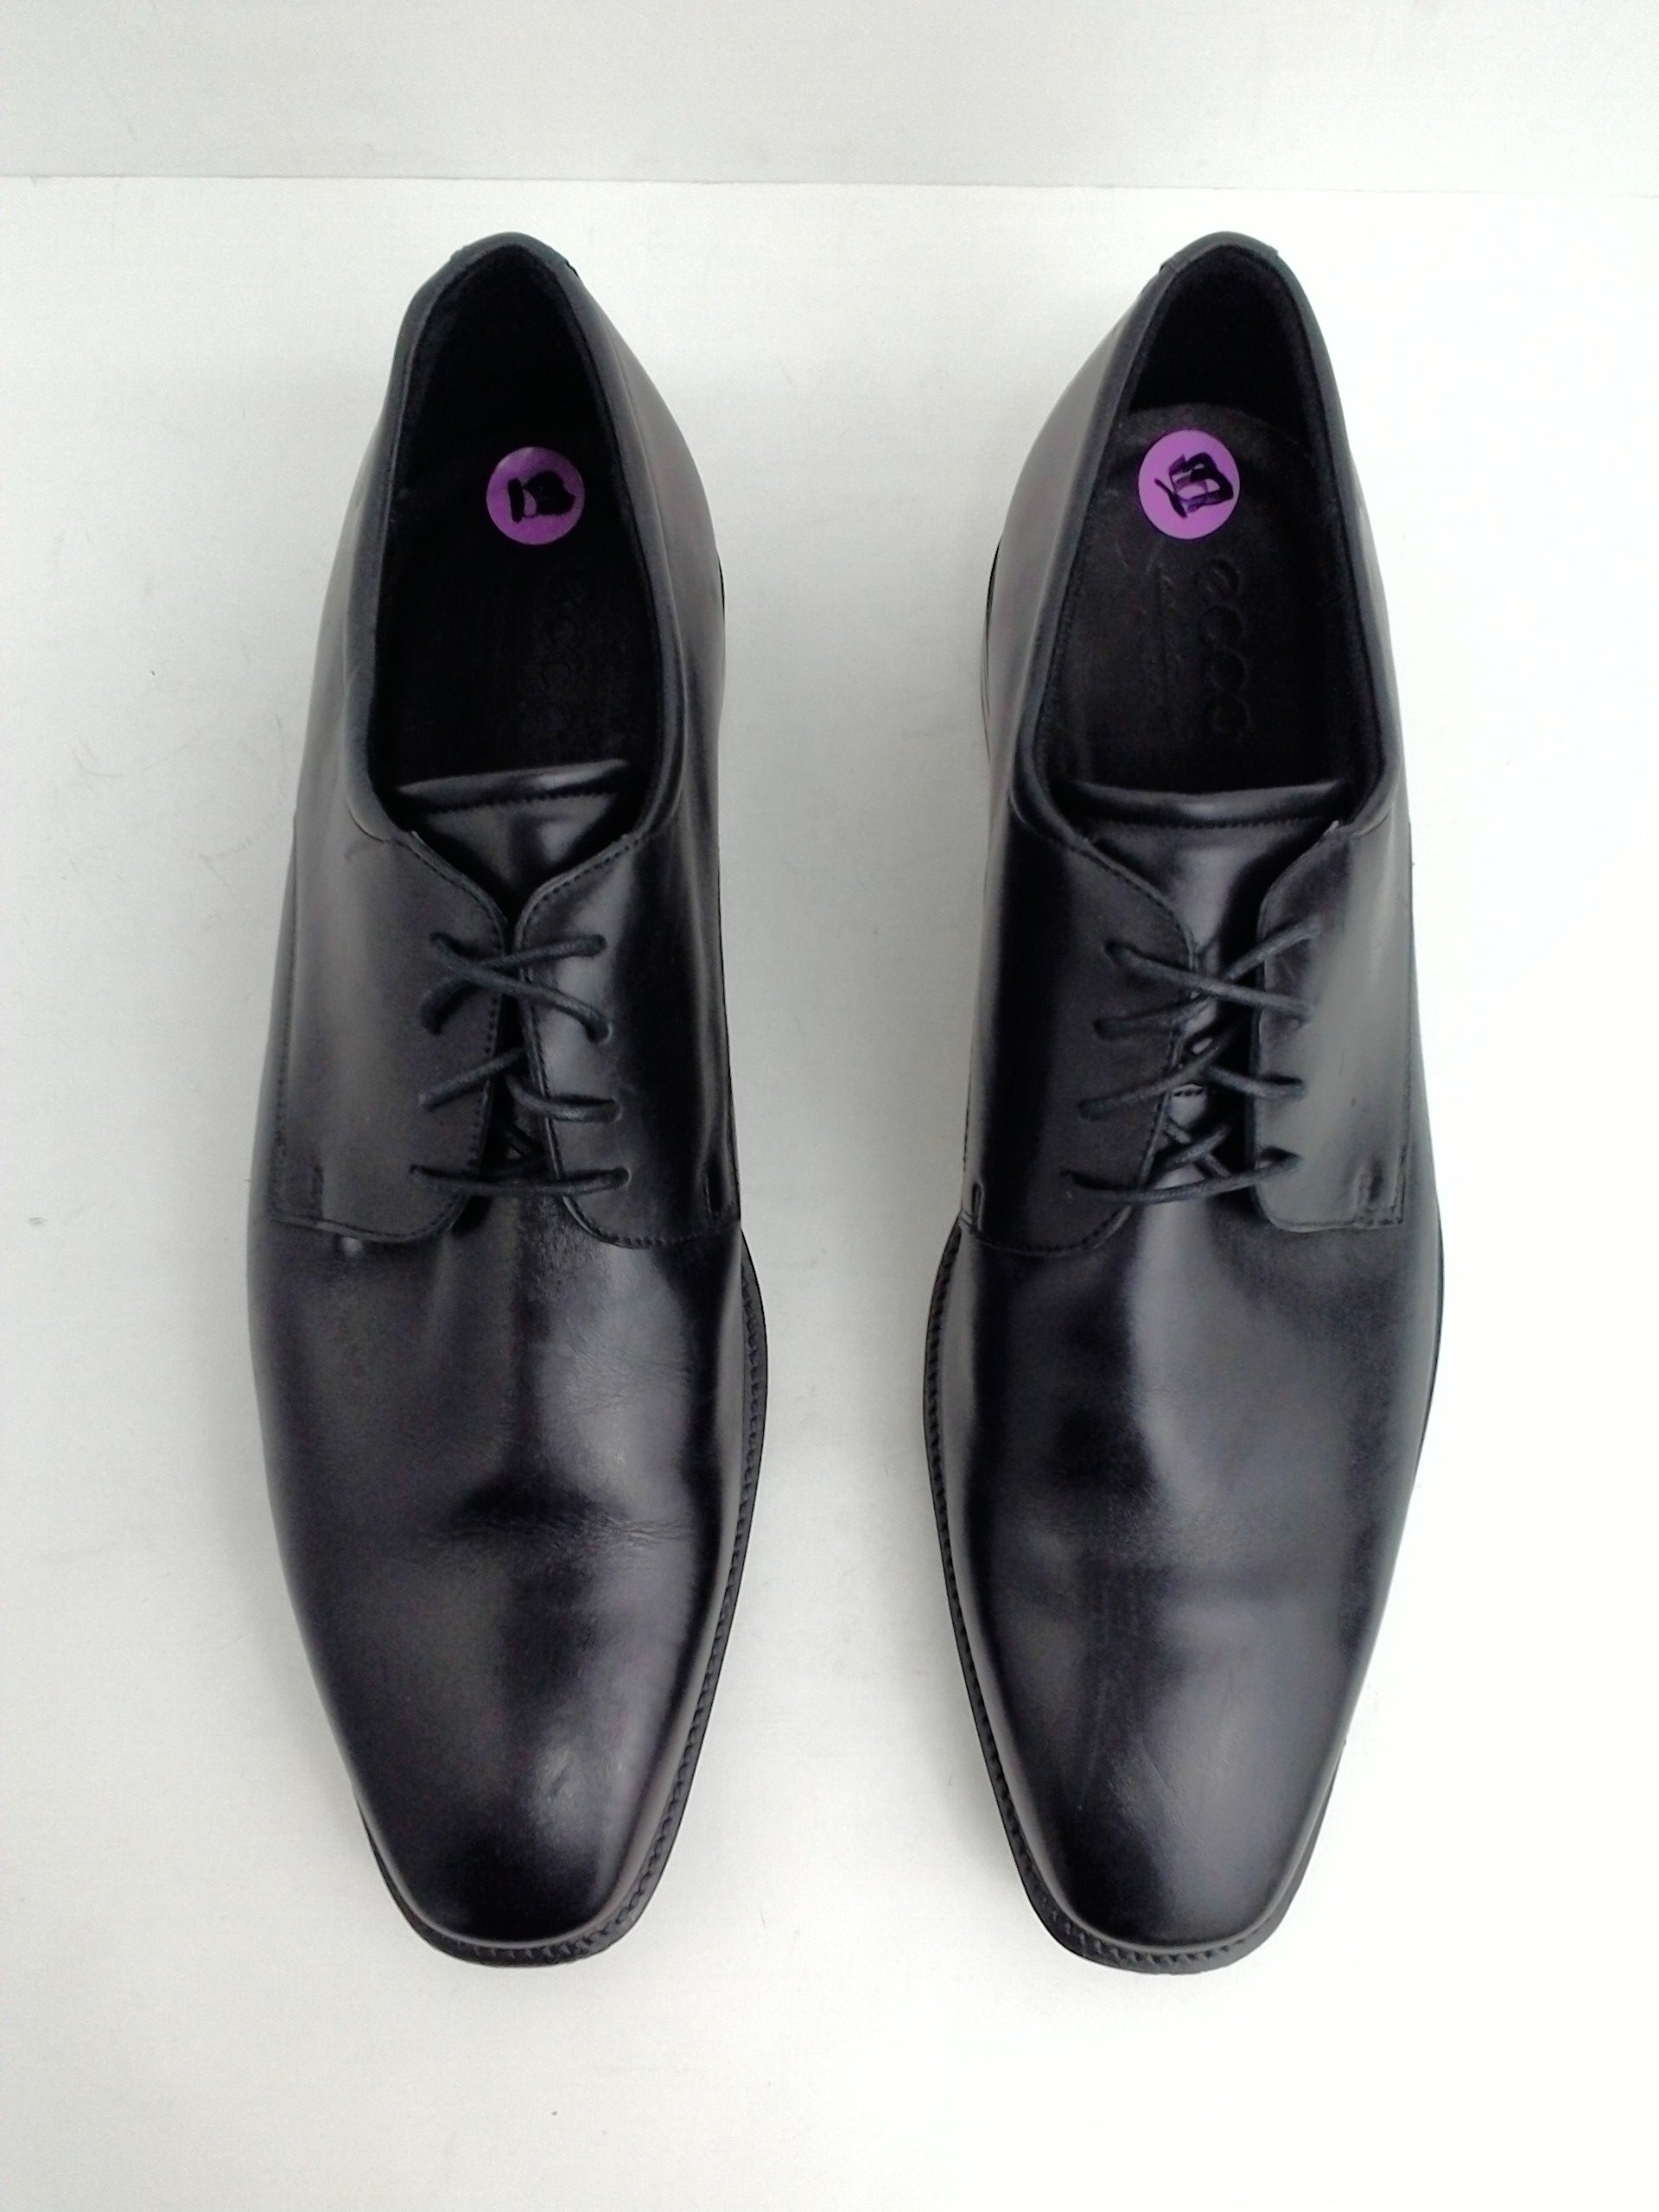 Ecco Men's Black Leather Oxford Size 47 - Prime Shoes and More